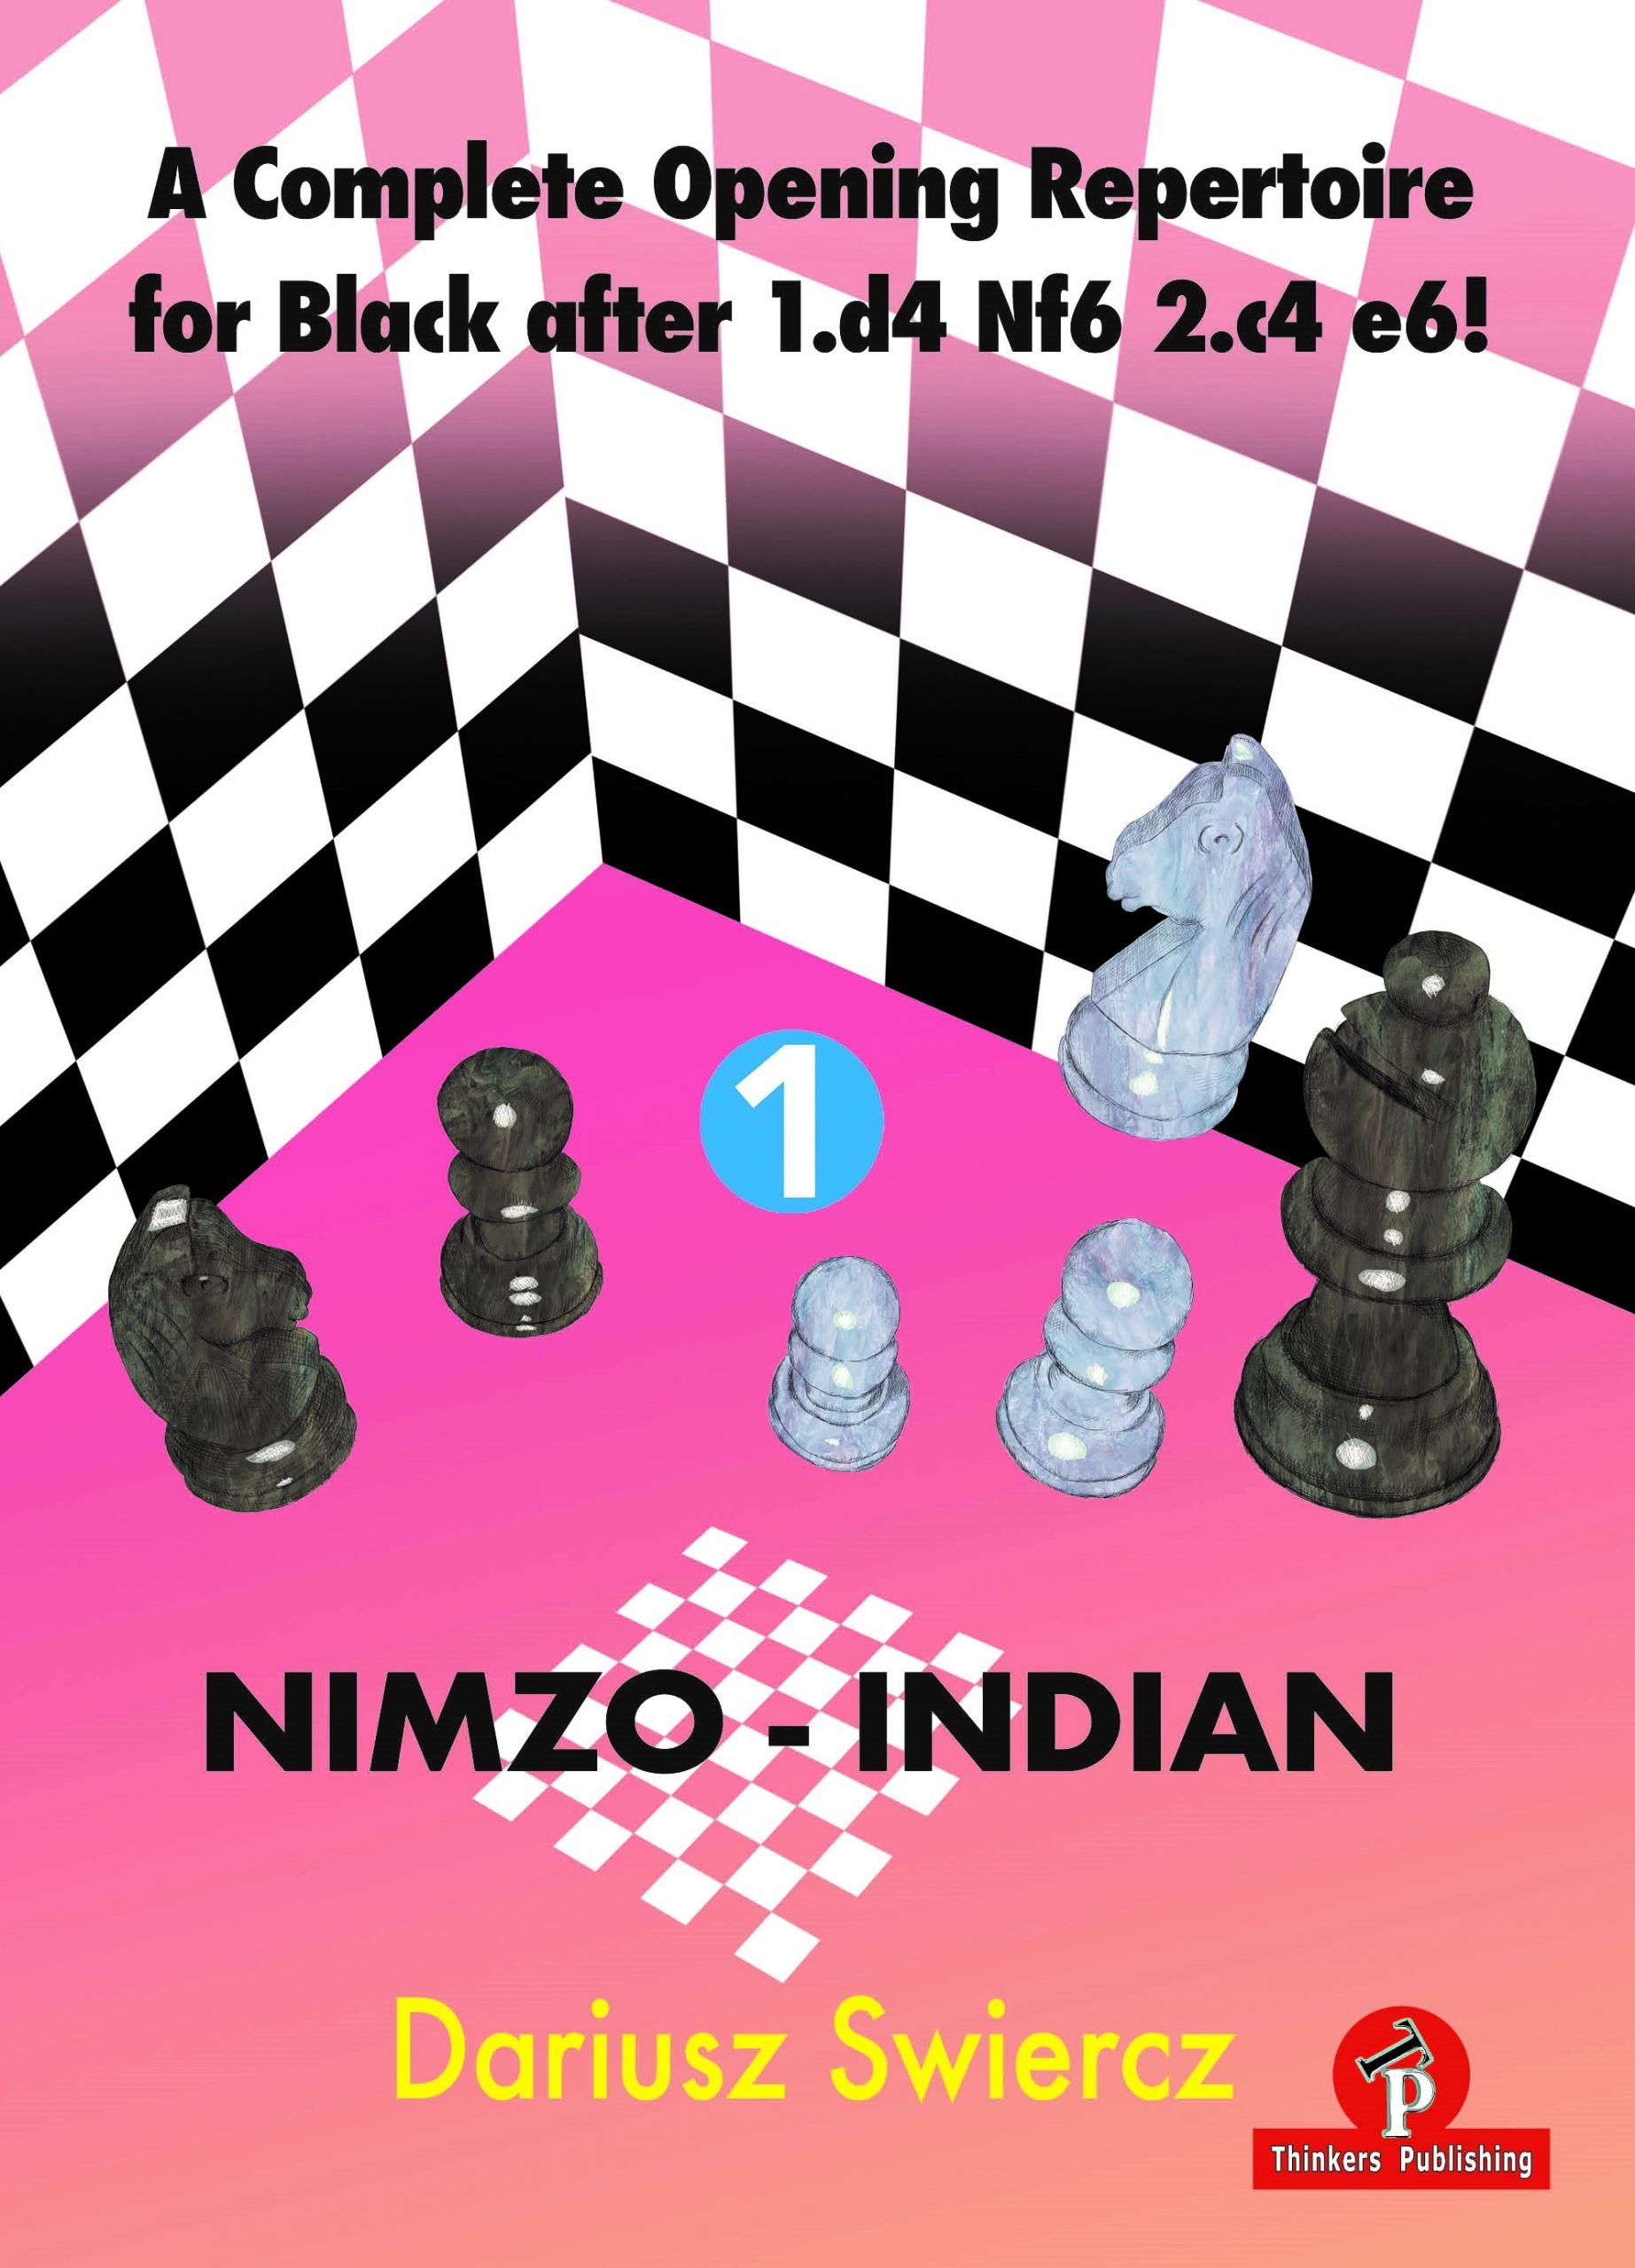 Swiercz: A Complete Opening Repertoire for Black after 1.d4 Nf6 2.c4 e6!, Volume 1